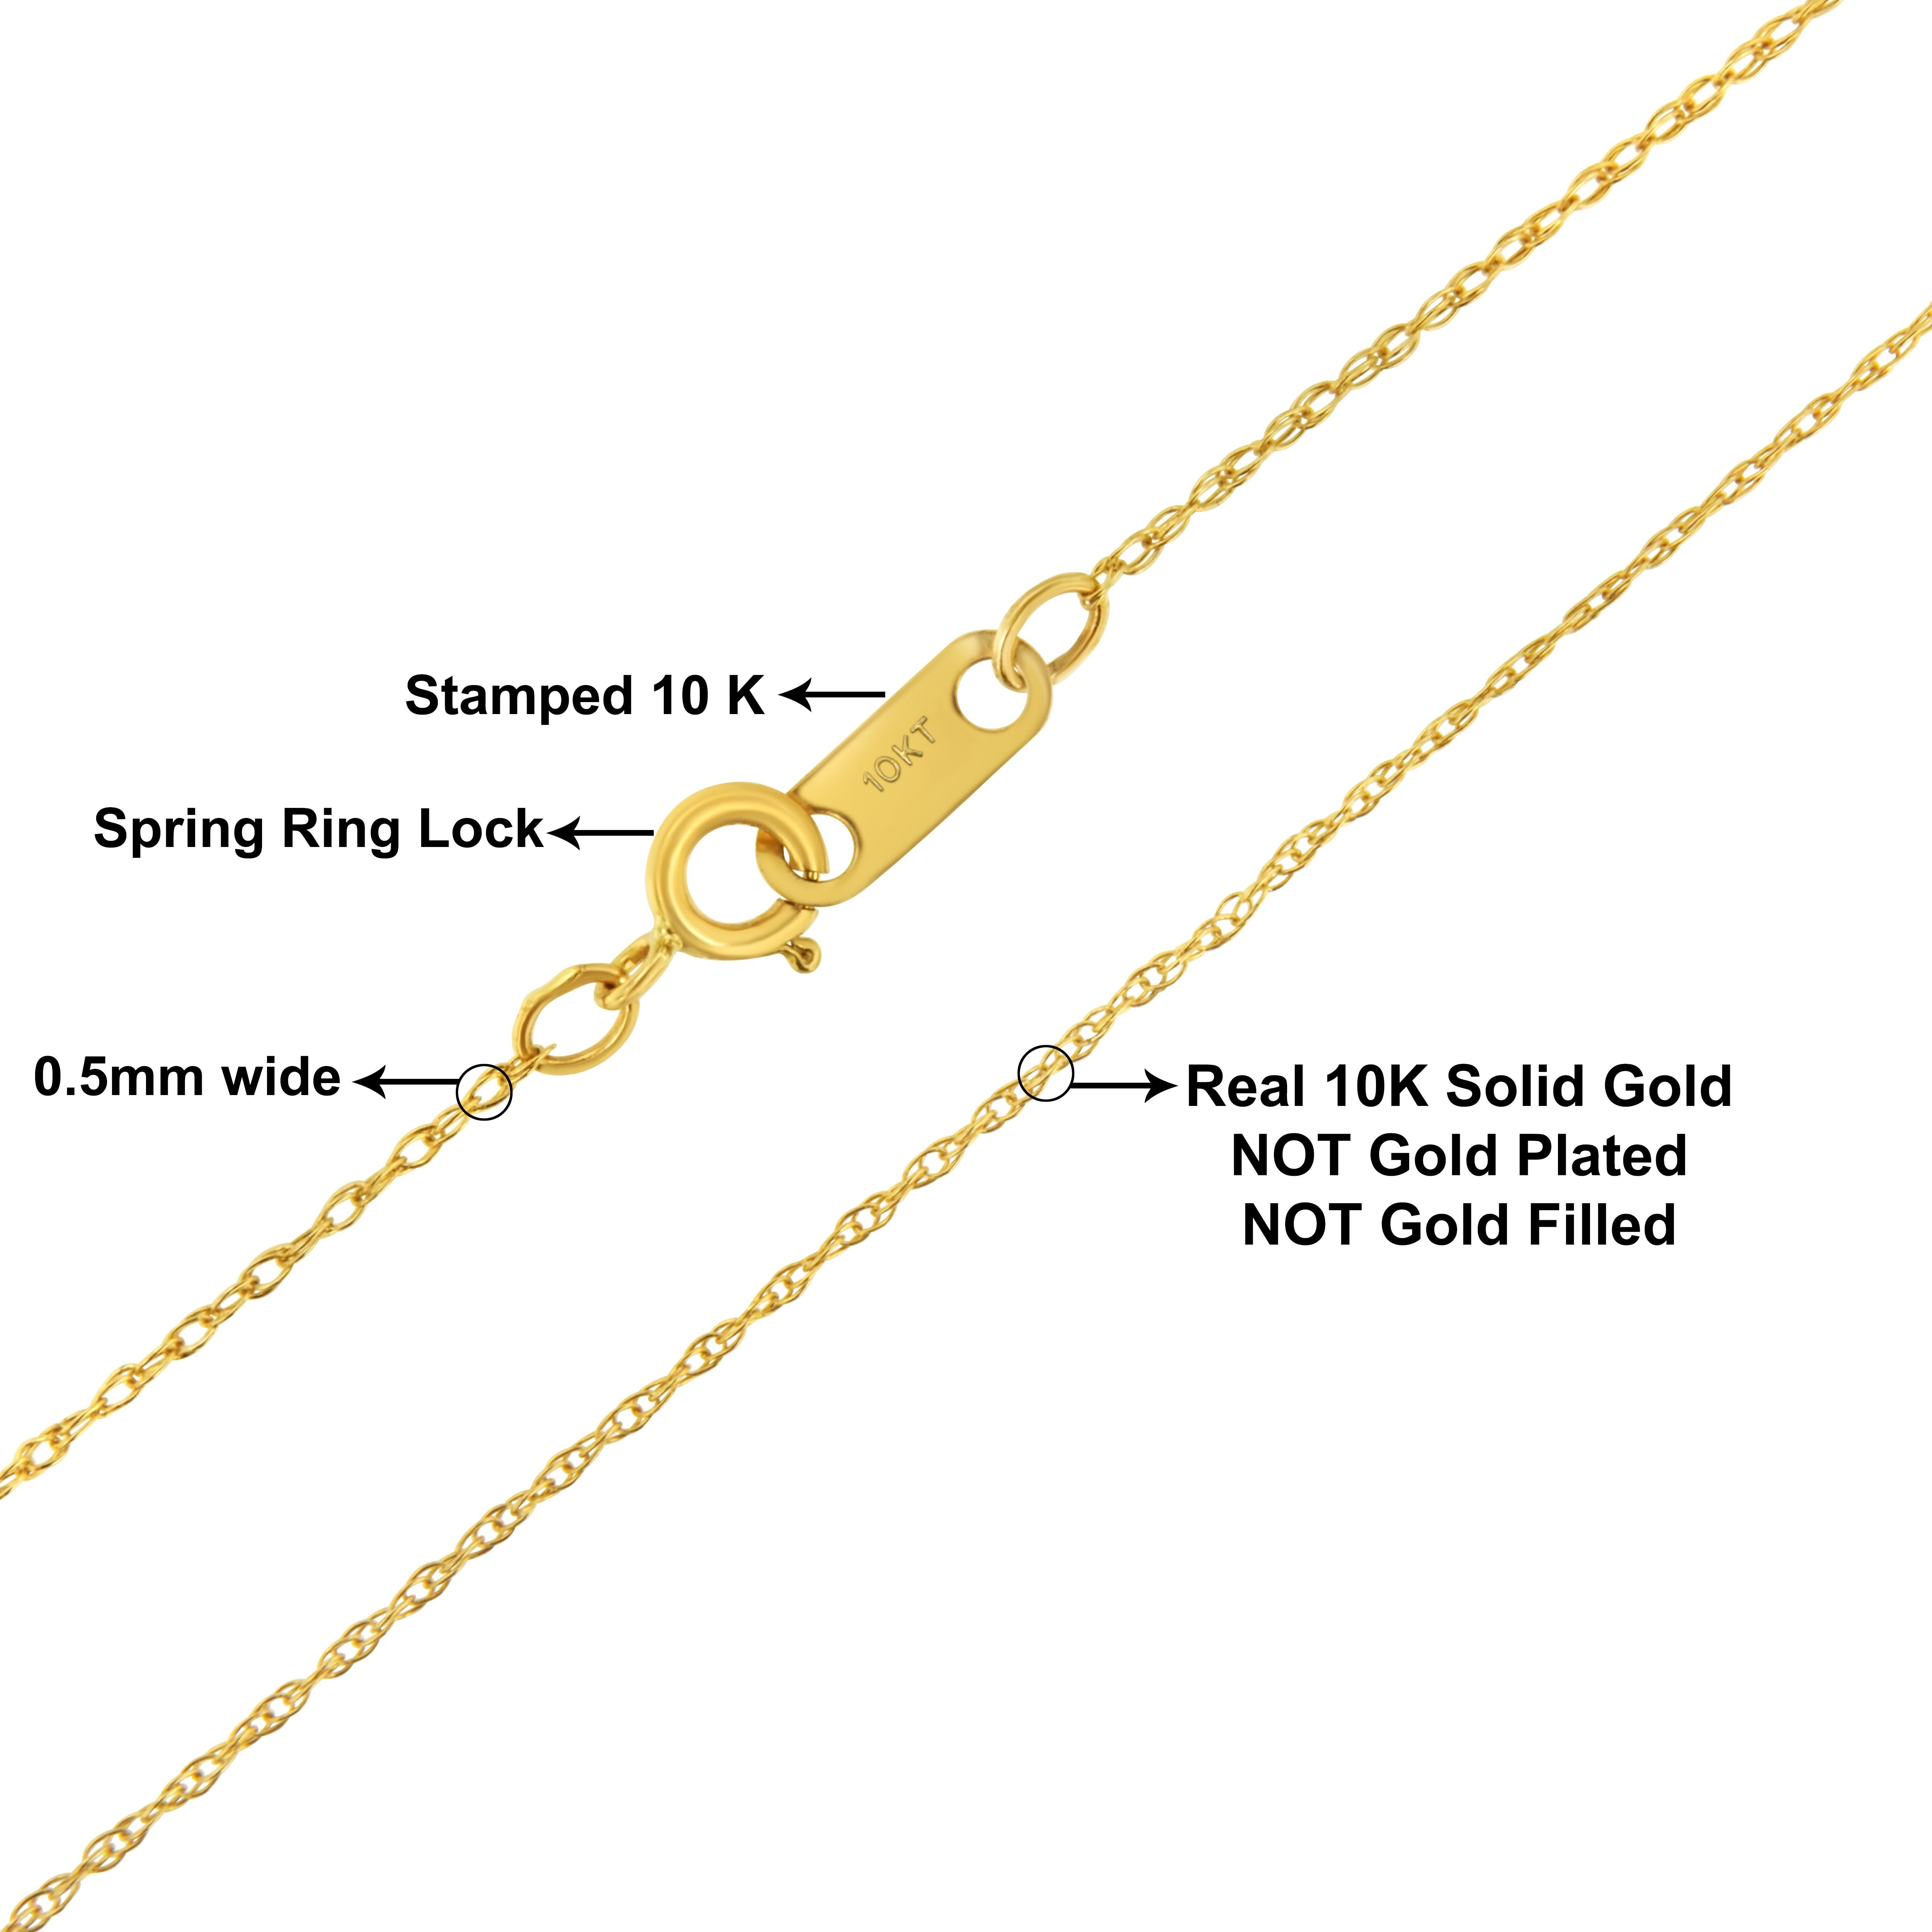 Presenting a feminine classic: a simple and dainty 10K yellow gold rope chain that is 18 inches in length. This thin, 1/2-millimeter wide chain fastens securely with a standard spring ring clasp. It can replace most chains and is perfect paired with